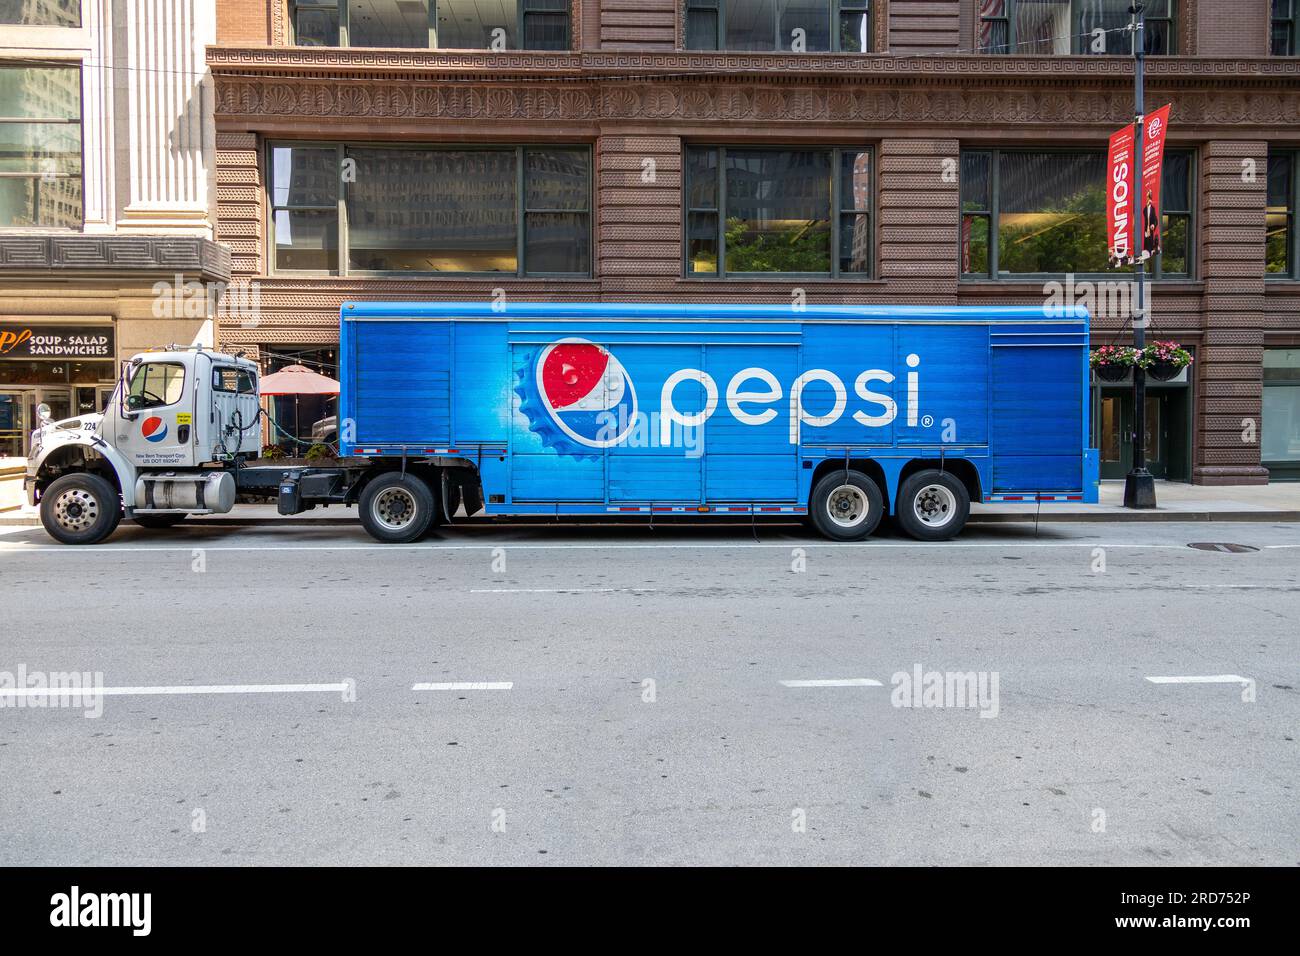 Pepsi Delivery Truck Stopped On Adams Street In Chicago Illinois USA, Pepsi A Leading Soda Brand In America Stock Photo